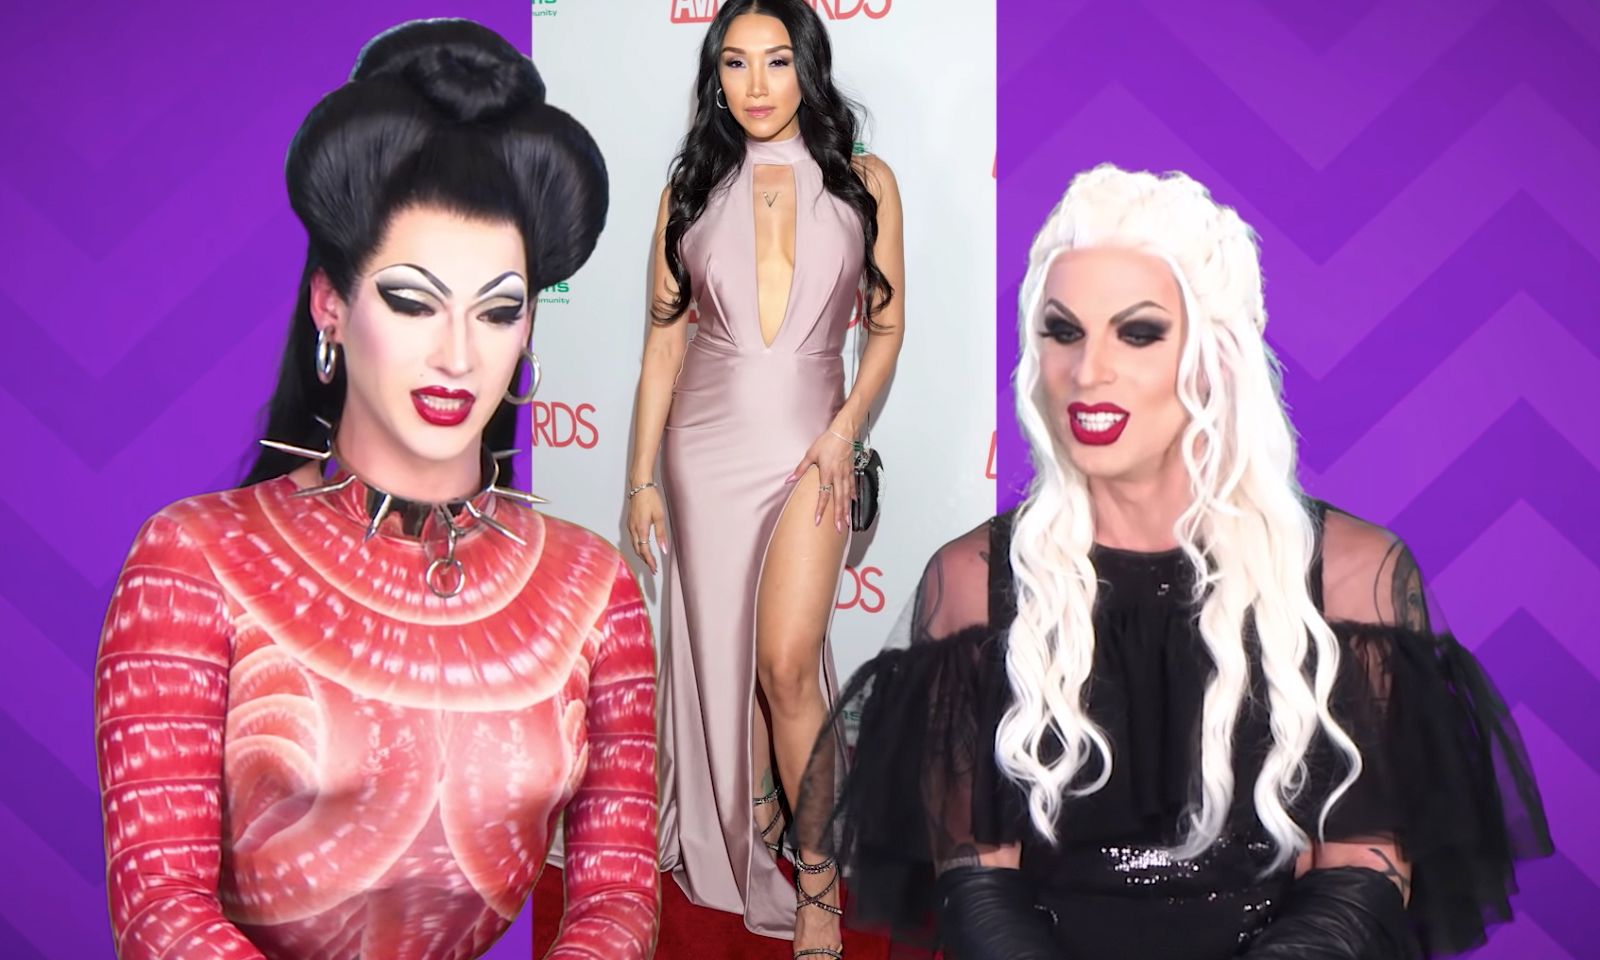 AVN Awards Red Carpet Gets ‘Fashion Photo RuView’ Treatment